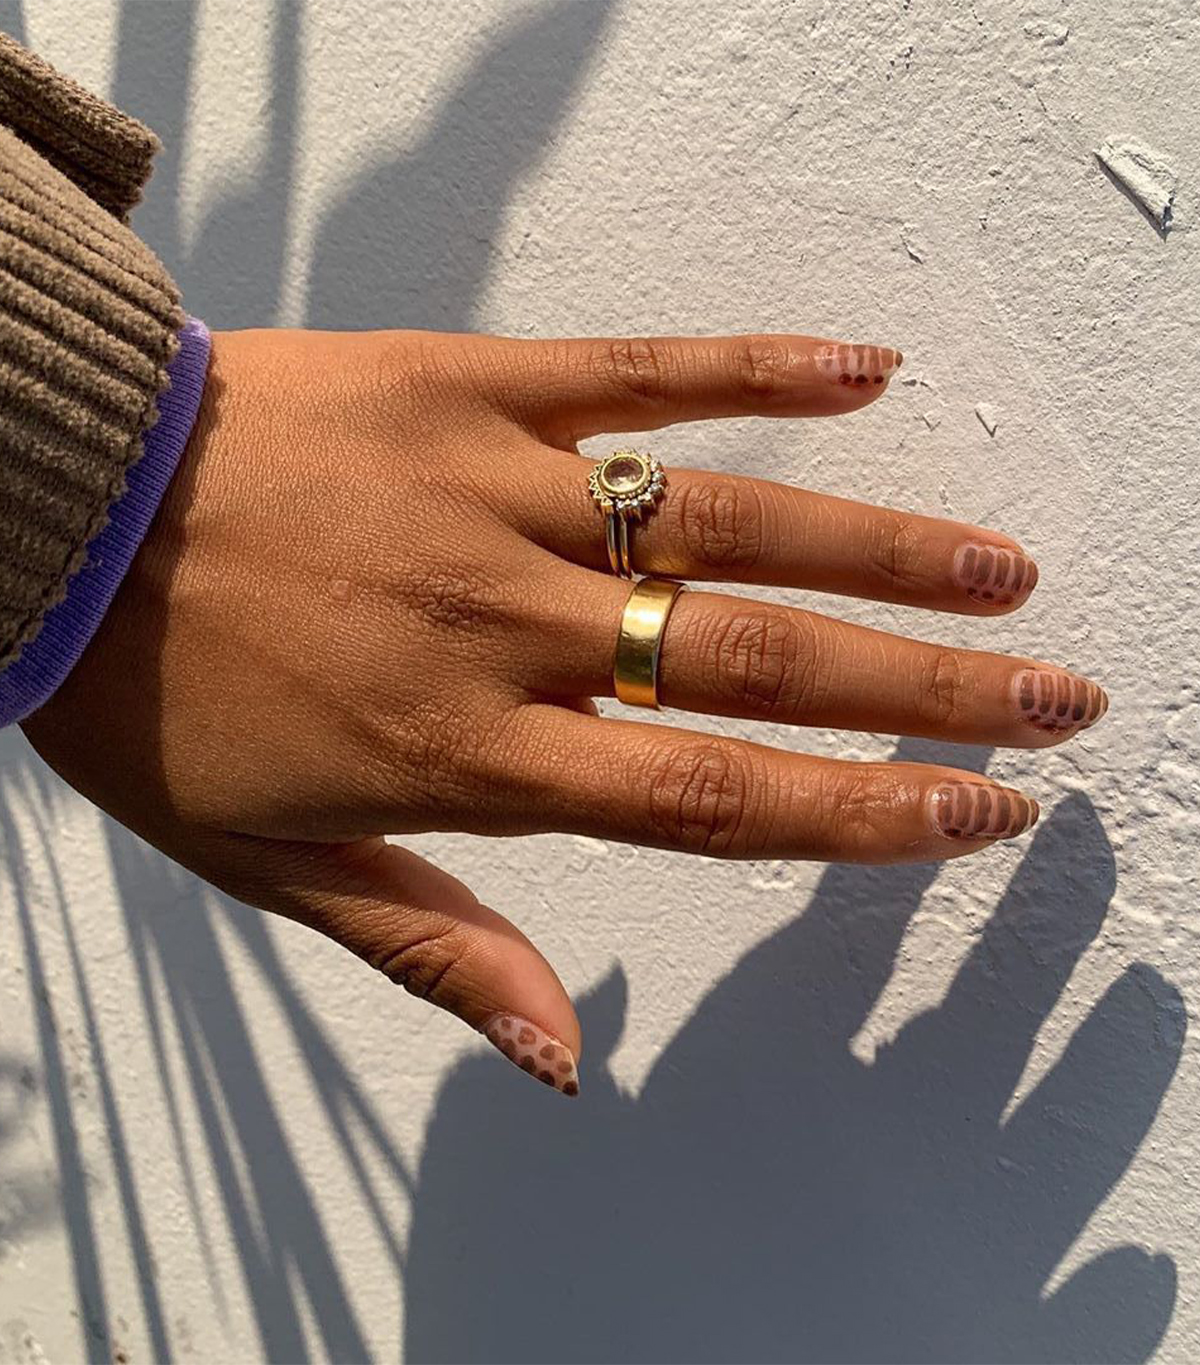 This “Ugly” Nail Colour Is Suddenly the Only One That Matters for Autumn